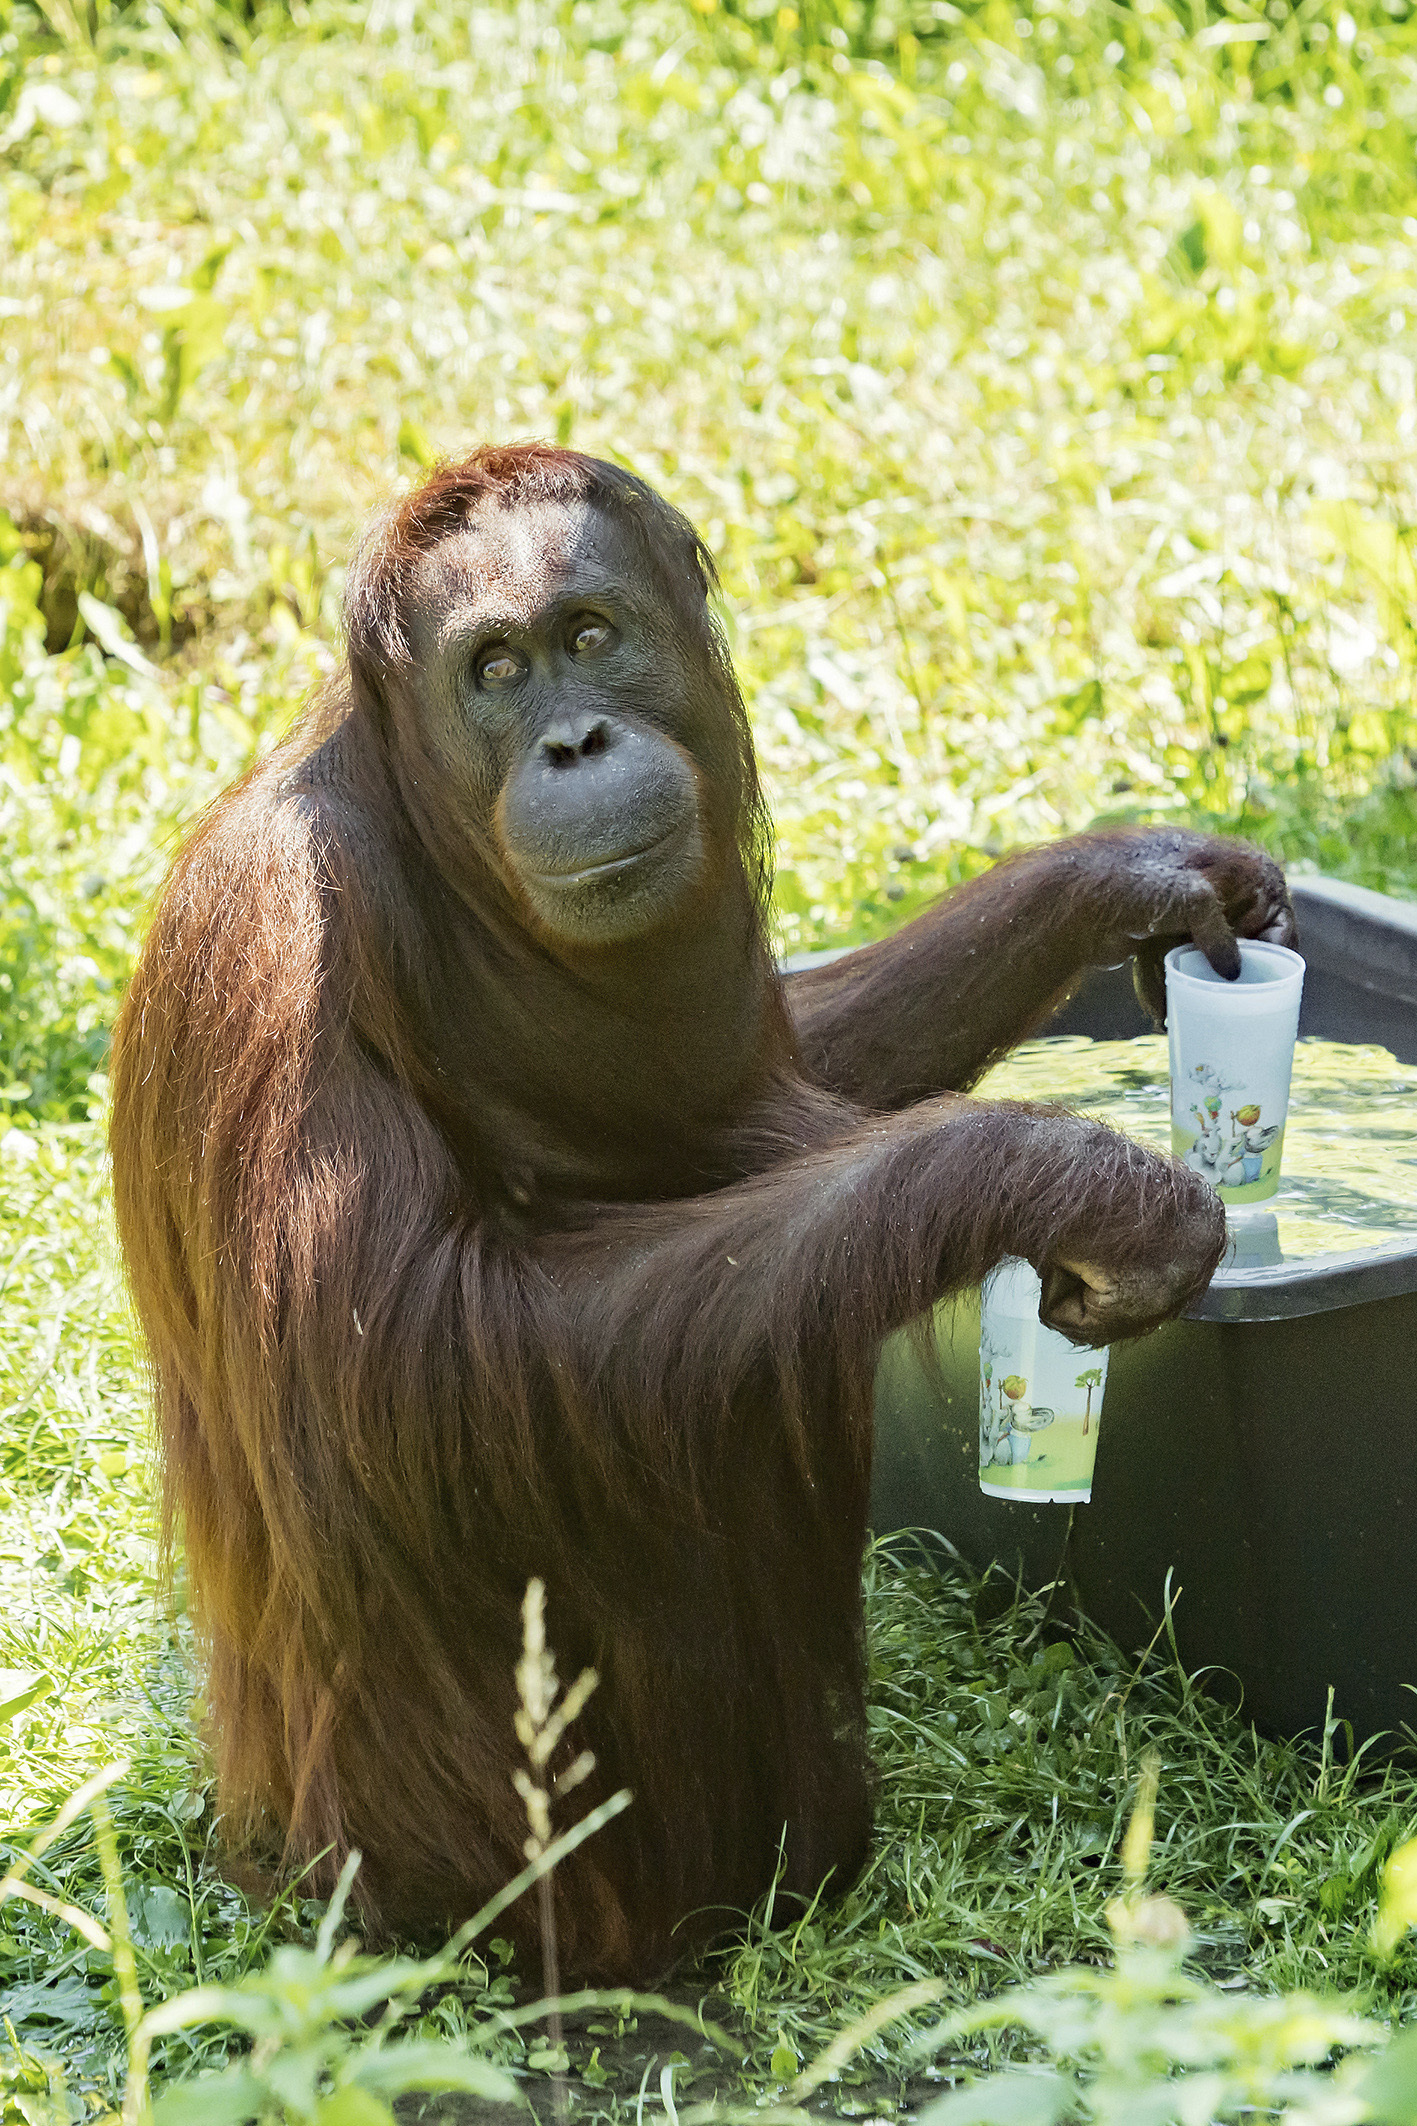 A handout picture of an orangutan filling his cups with water at the zoo Schoenbrunn in Vienna, Austria